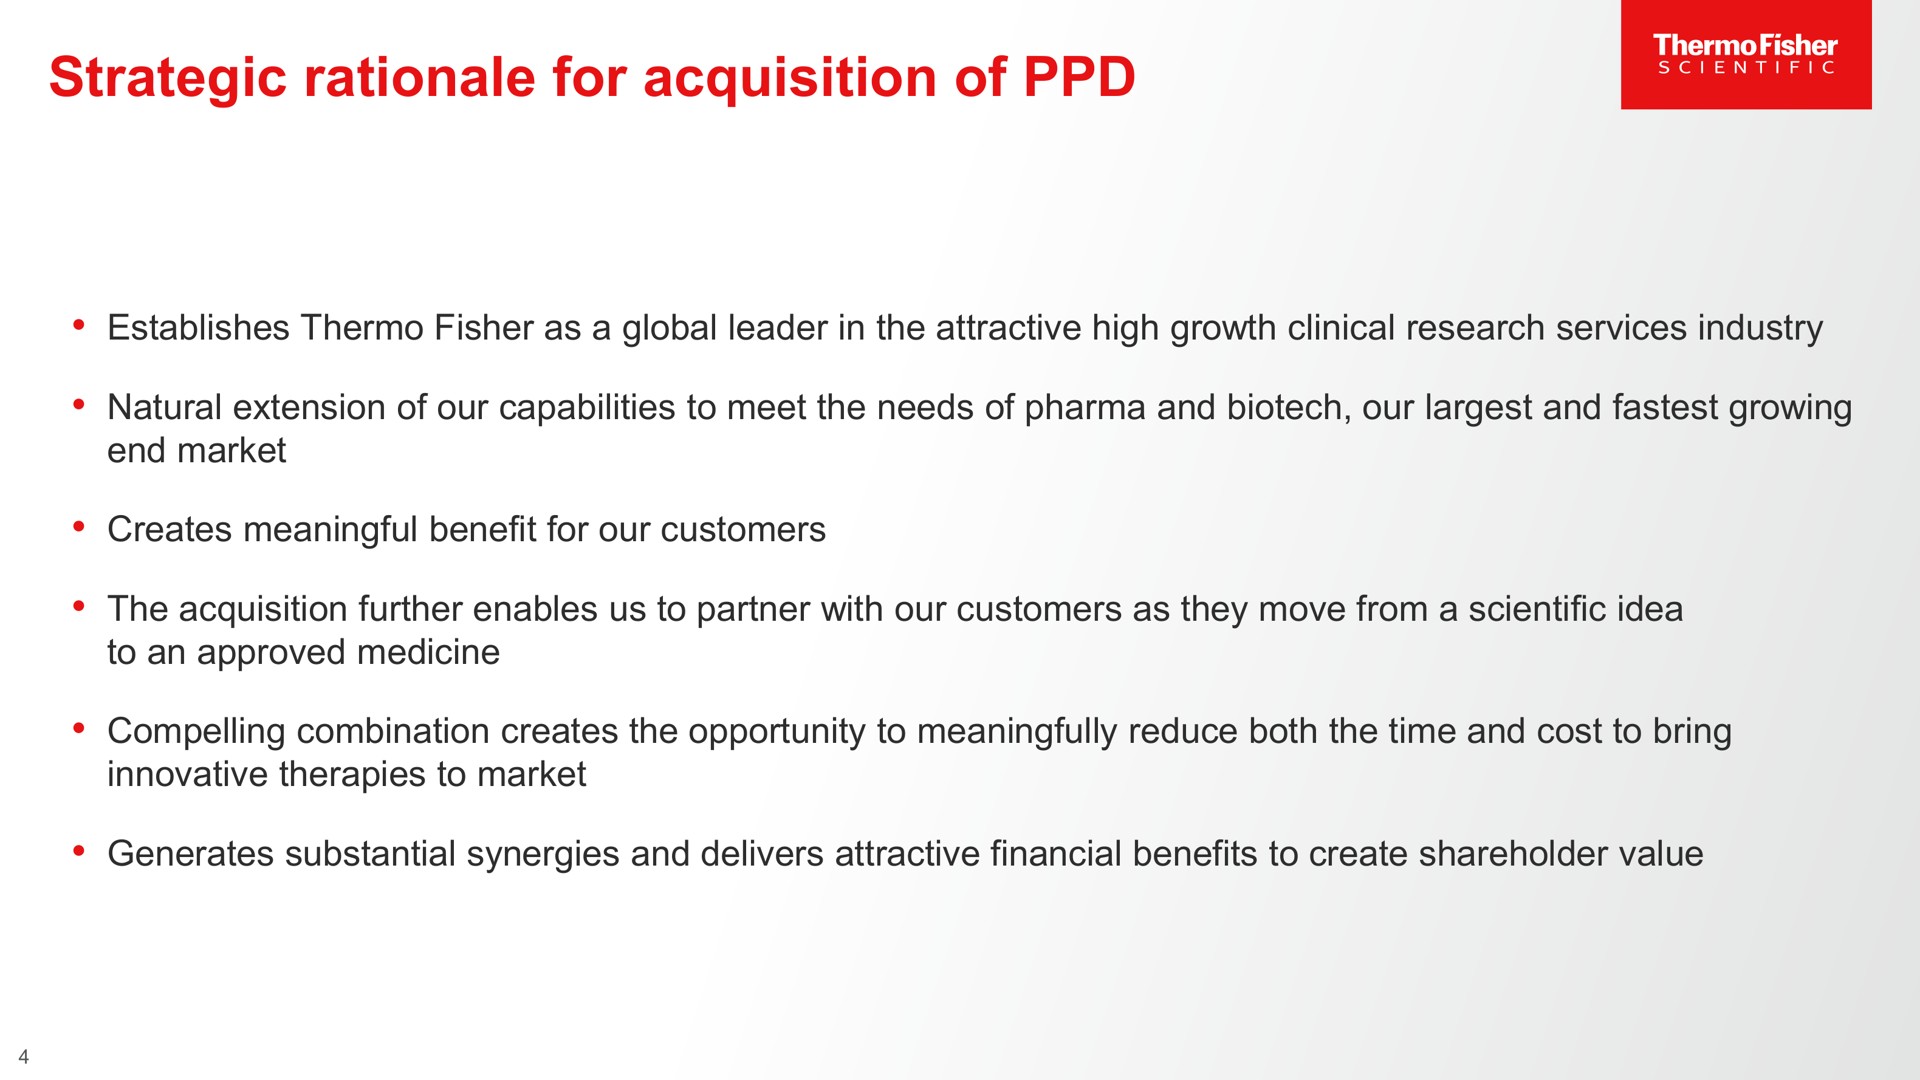 strategic rationale for acquisition of | Thermo Fisher